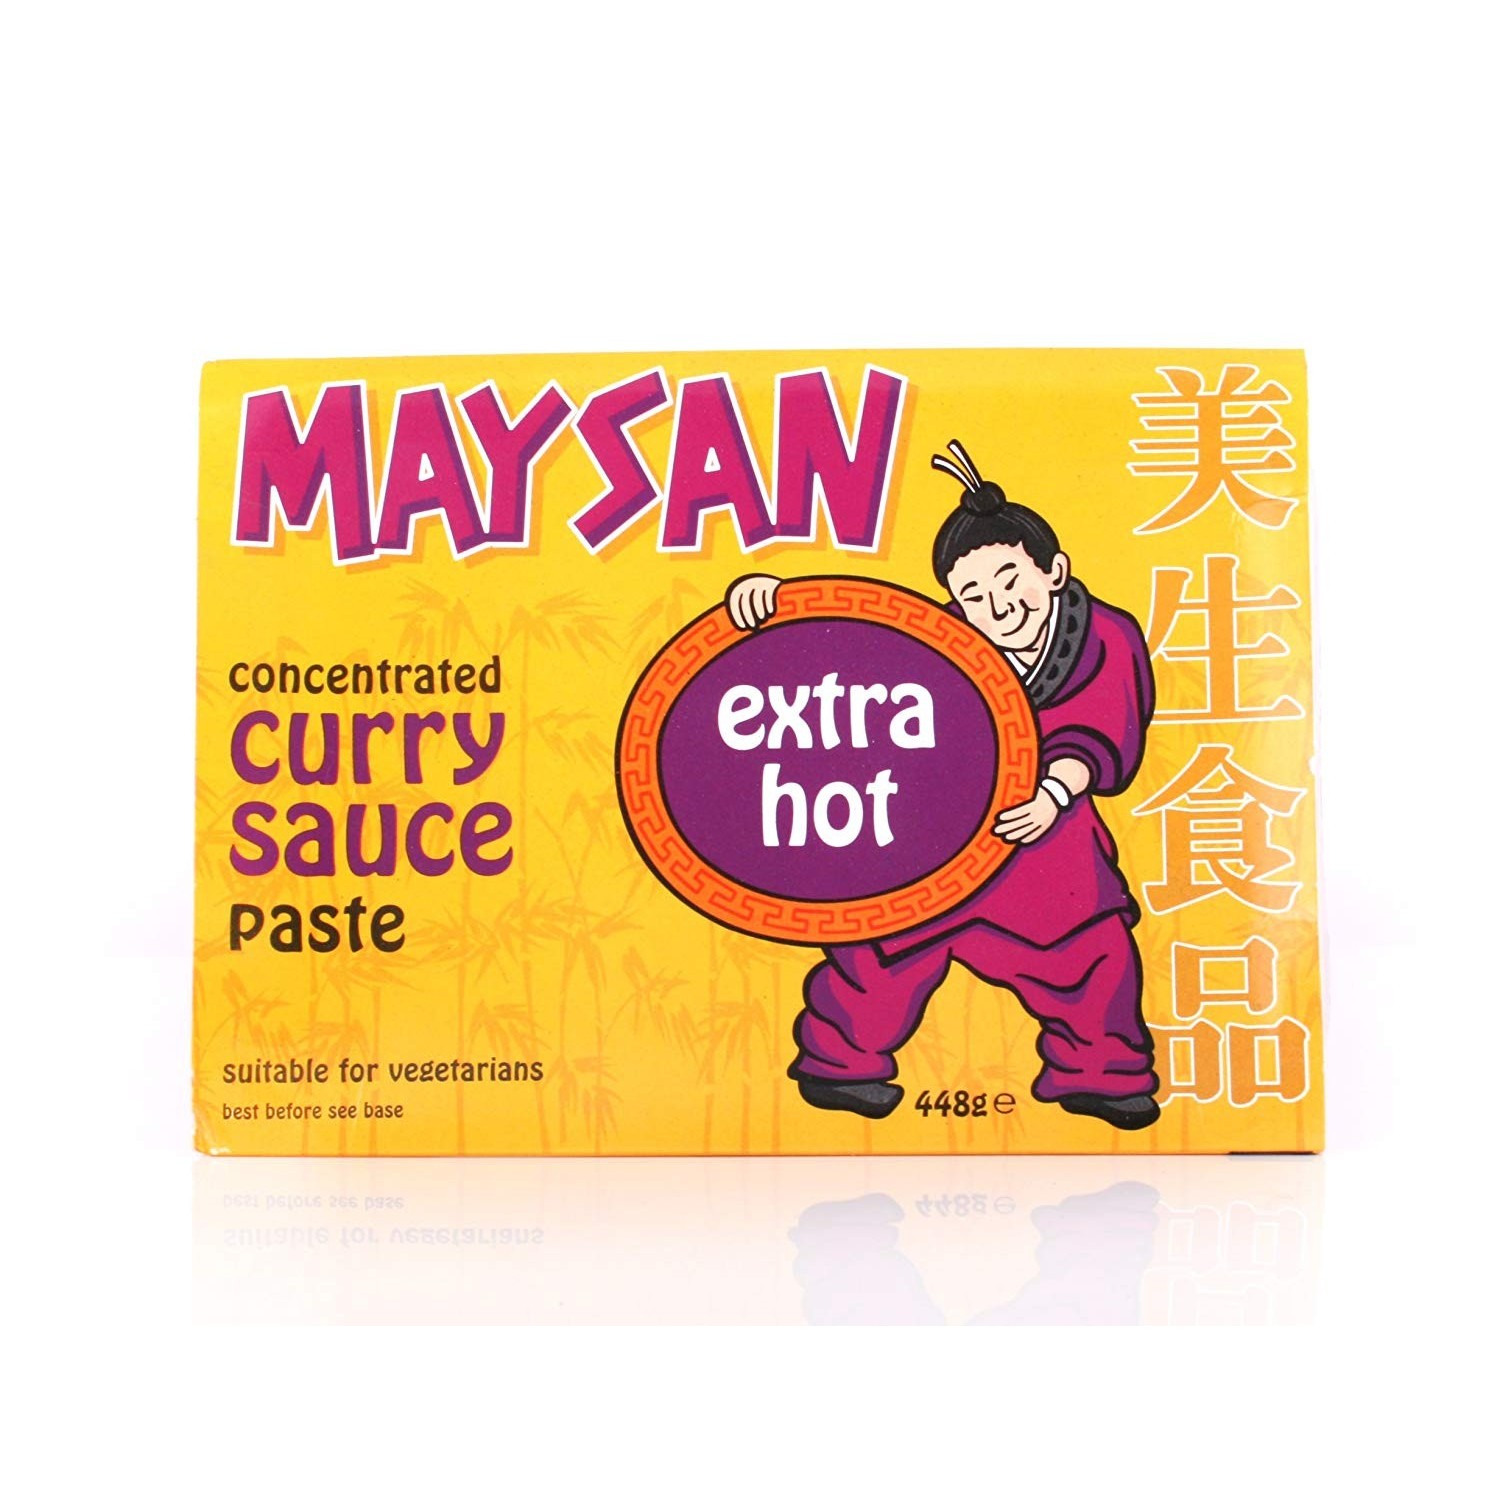 Maysan Concentrated 448g Extra Hot Curry Sauce Paste